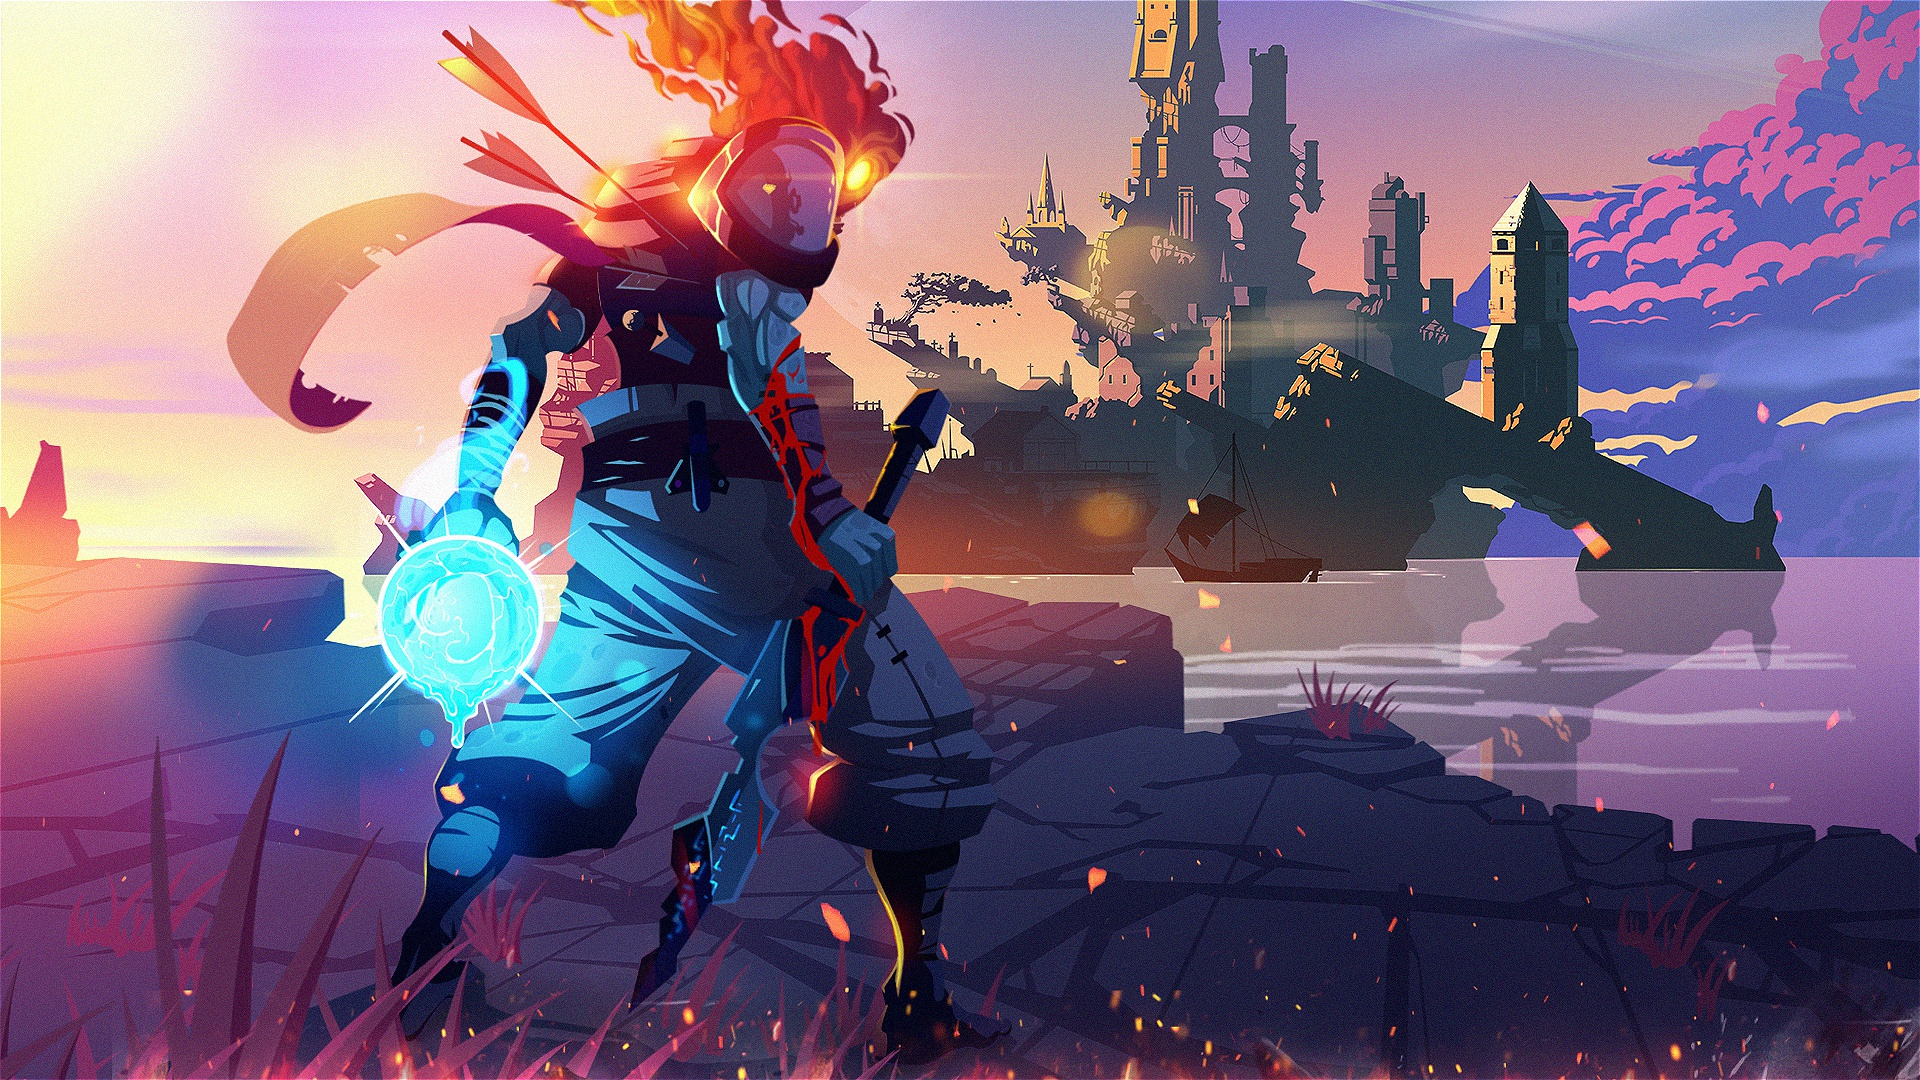 dead cells, video game